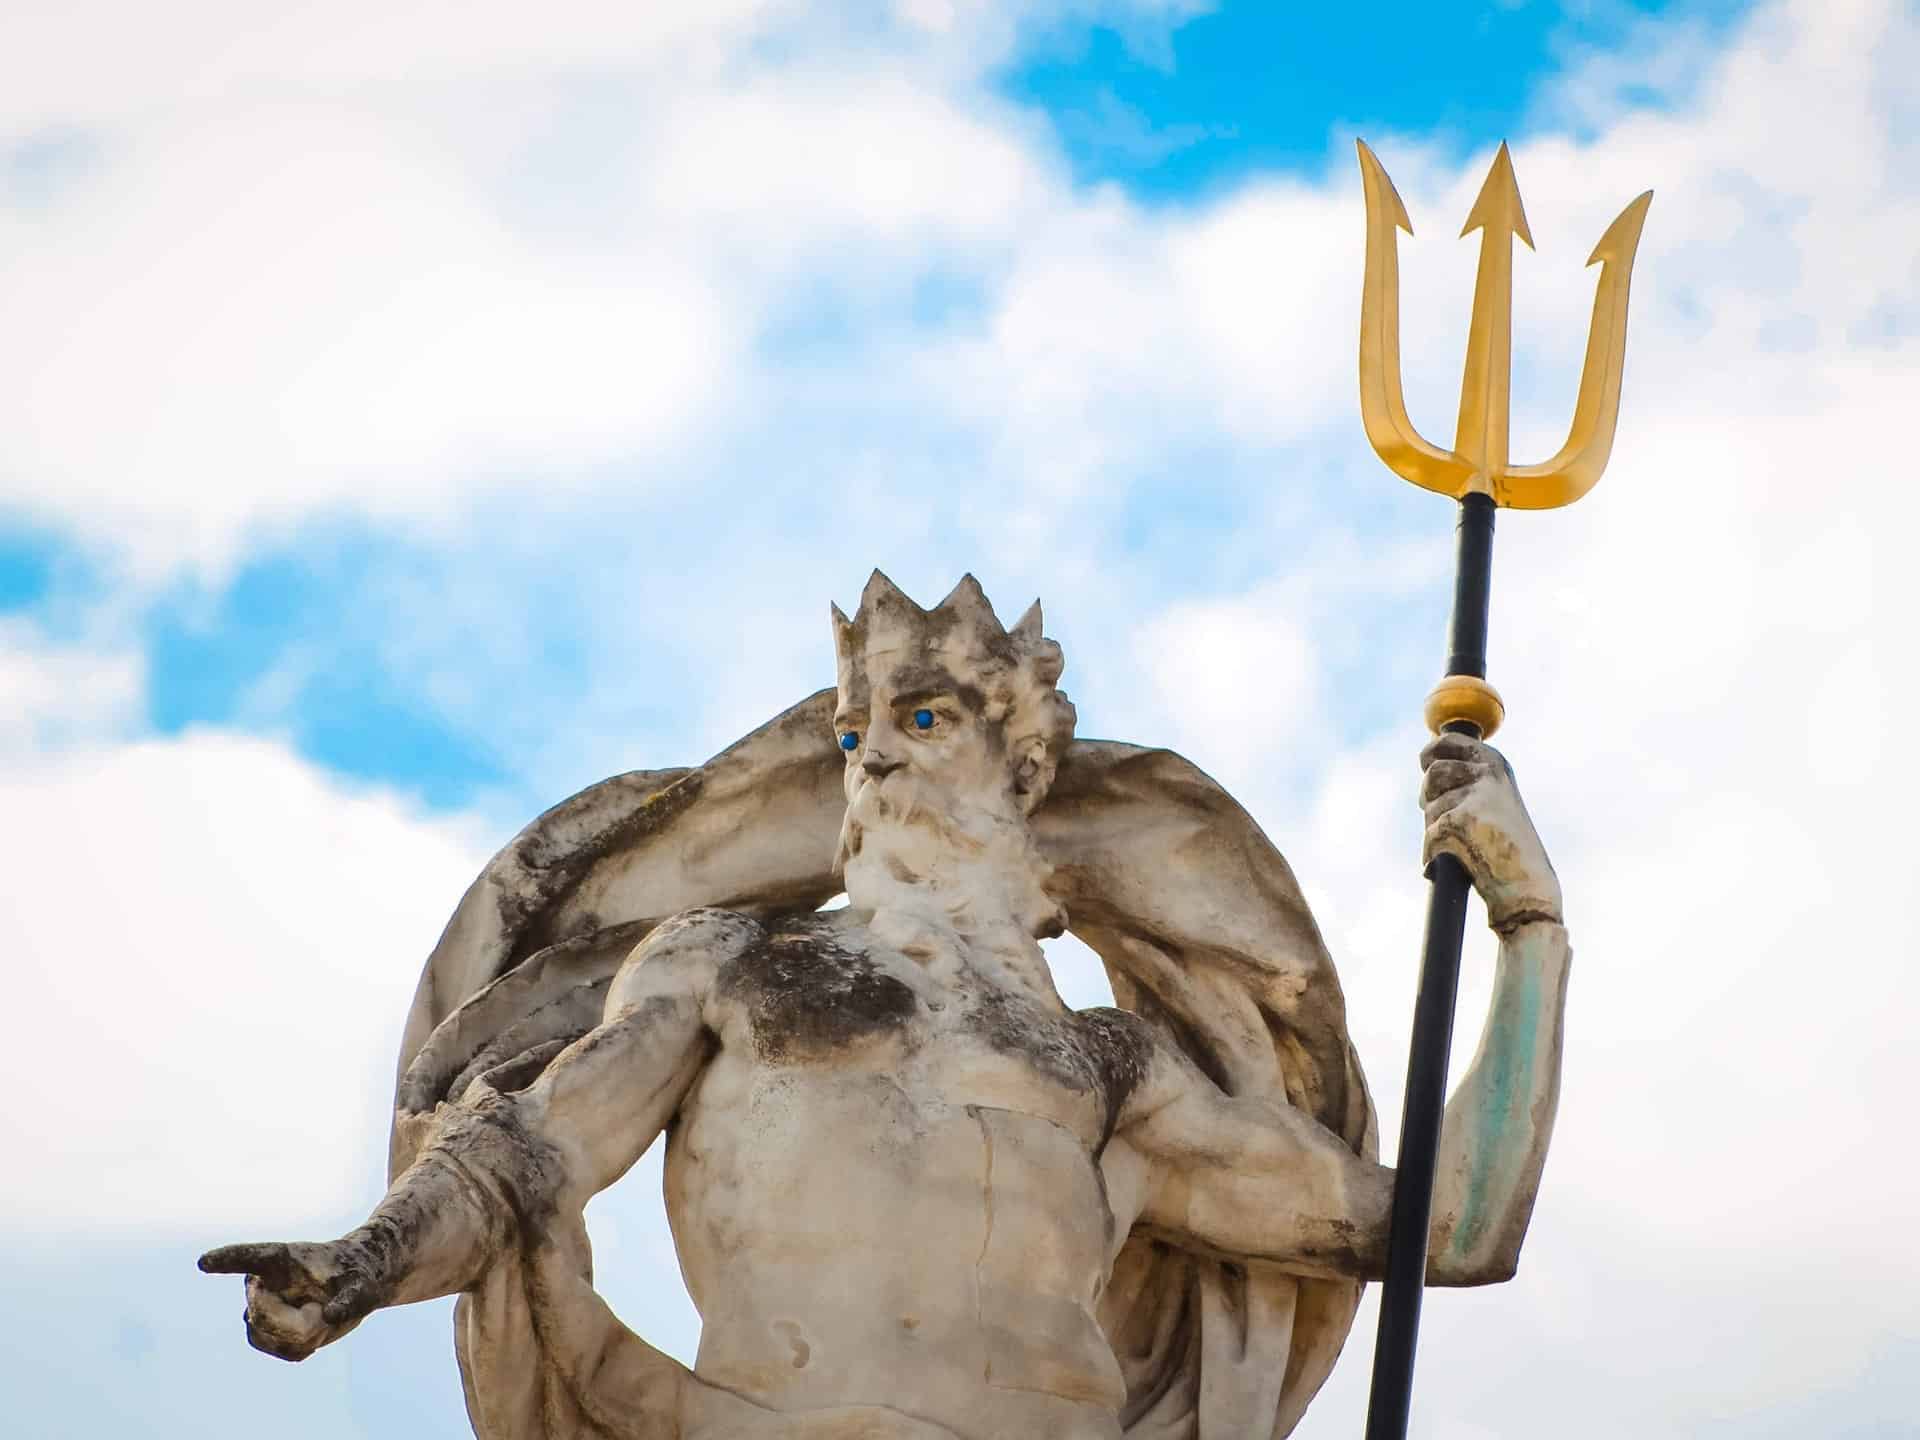 Neptune with trident statue